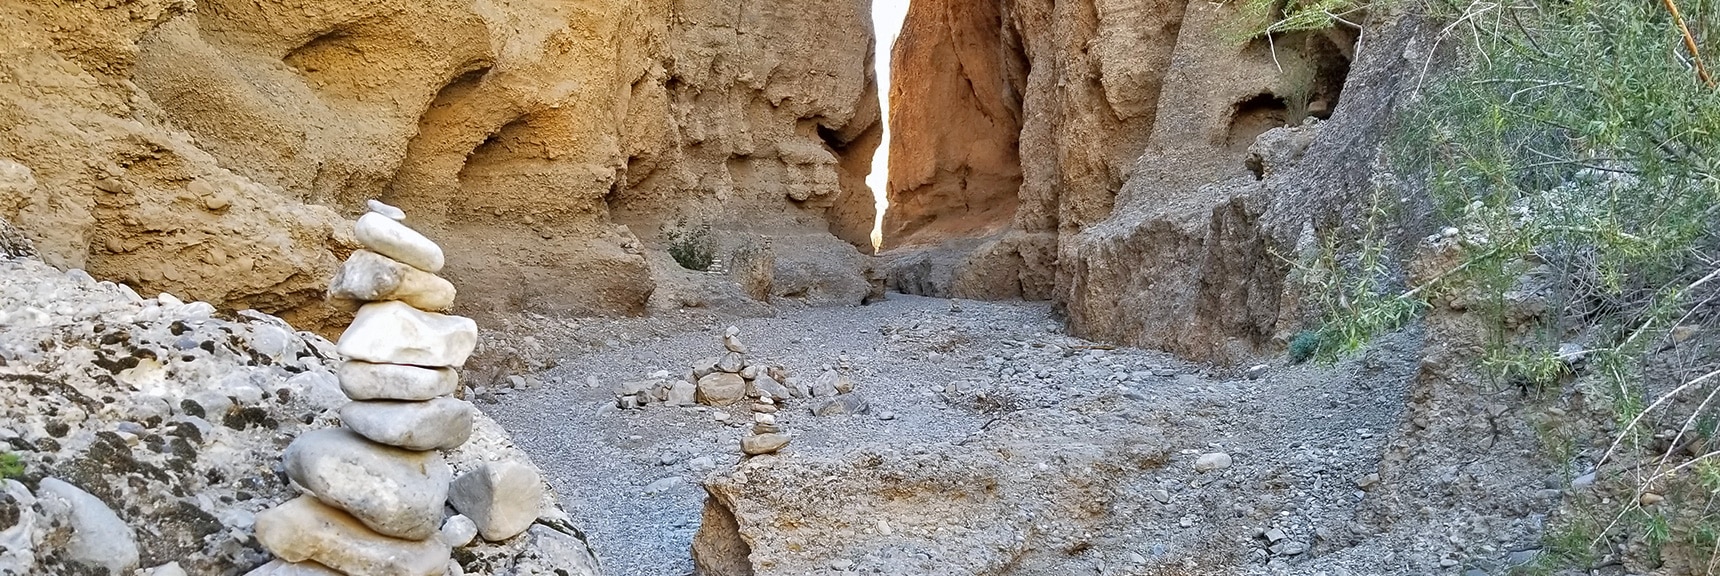 Many Cairns on This Day Marking the Obvious Path! | Harris Springs Canyon | Biking from Centennial Hills | Spring Mountains, Nevada